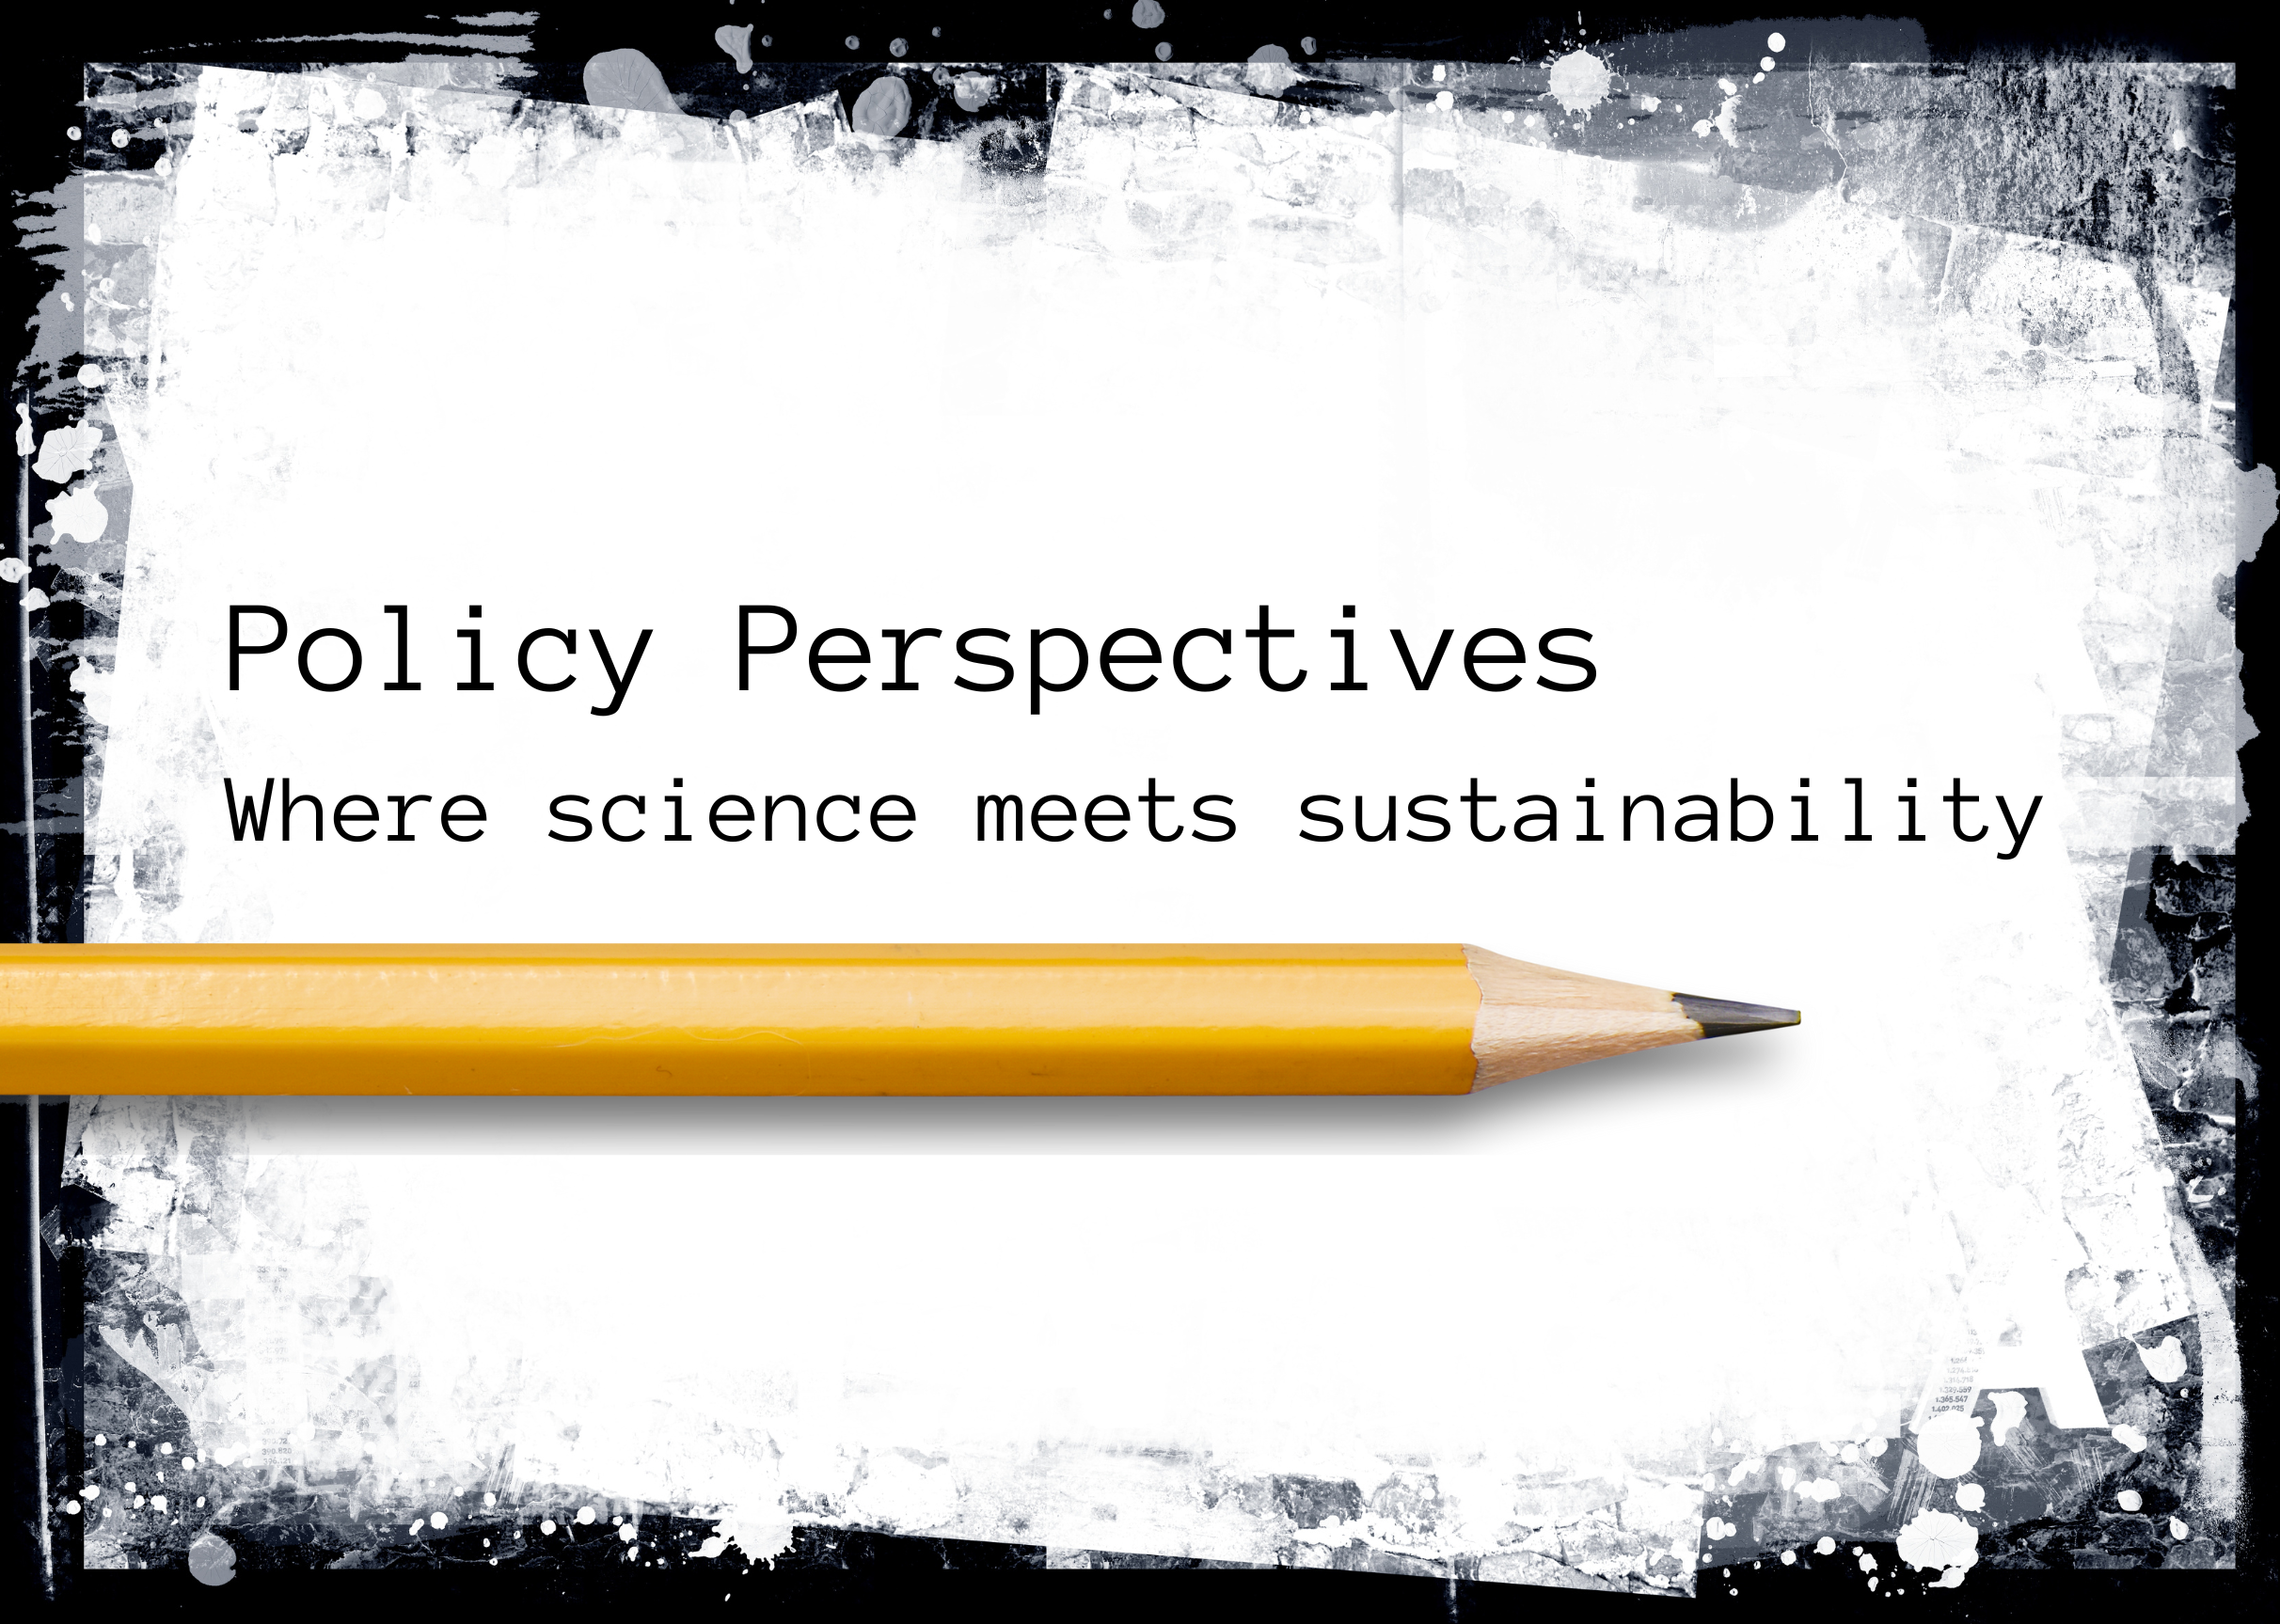 Policy Perspectives: Where science meets sustainability